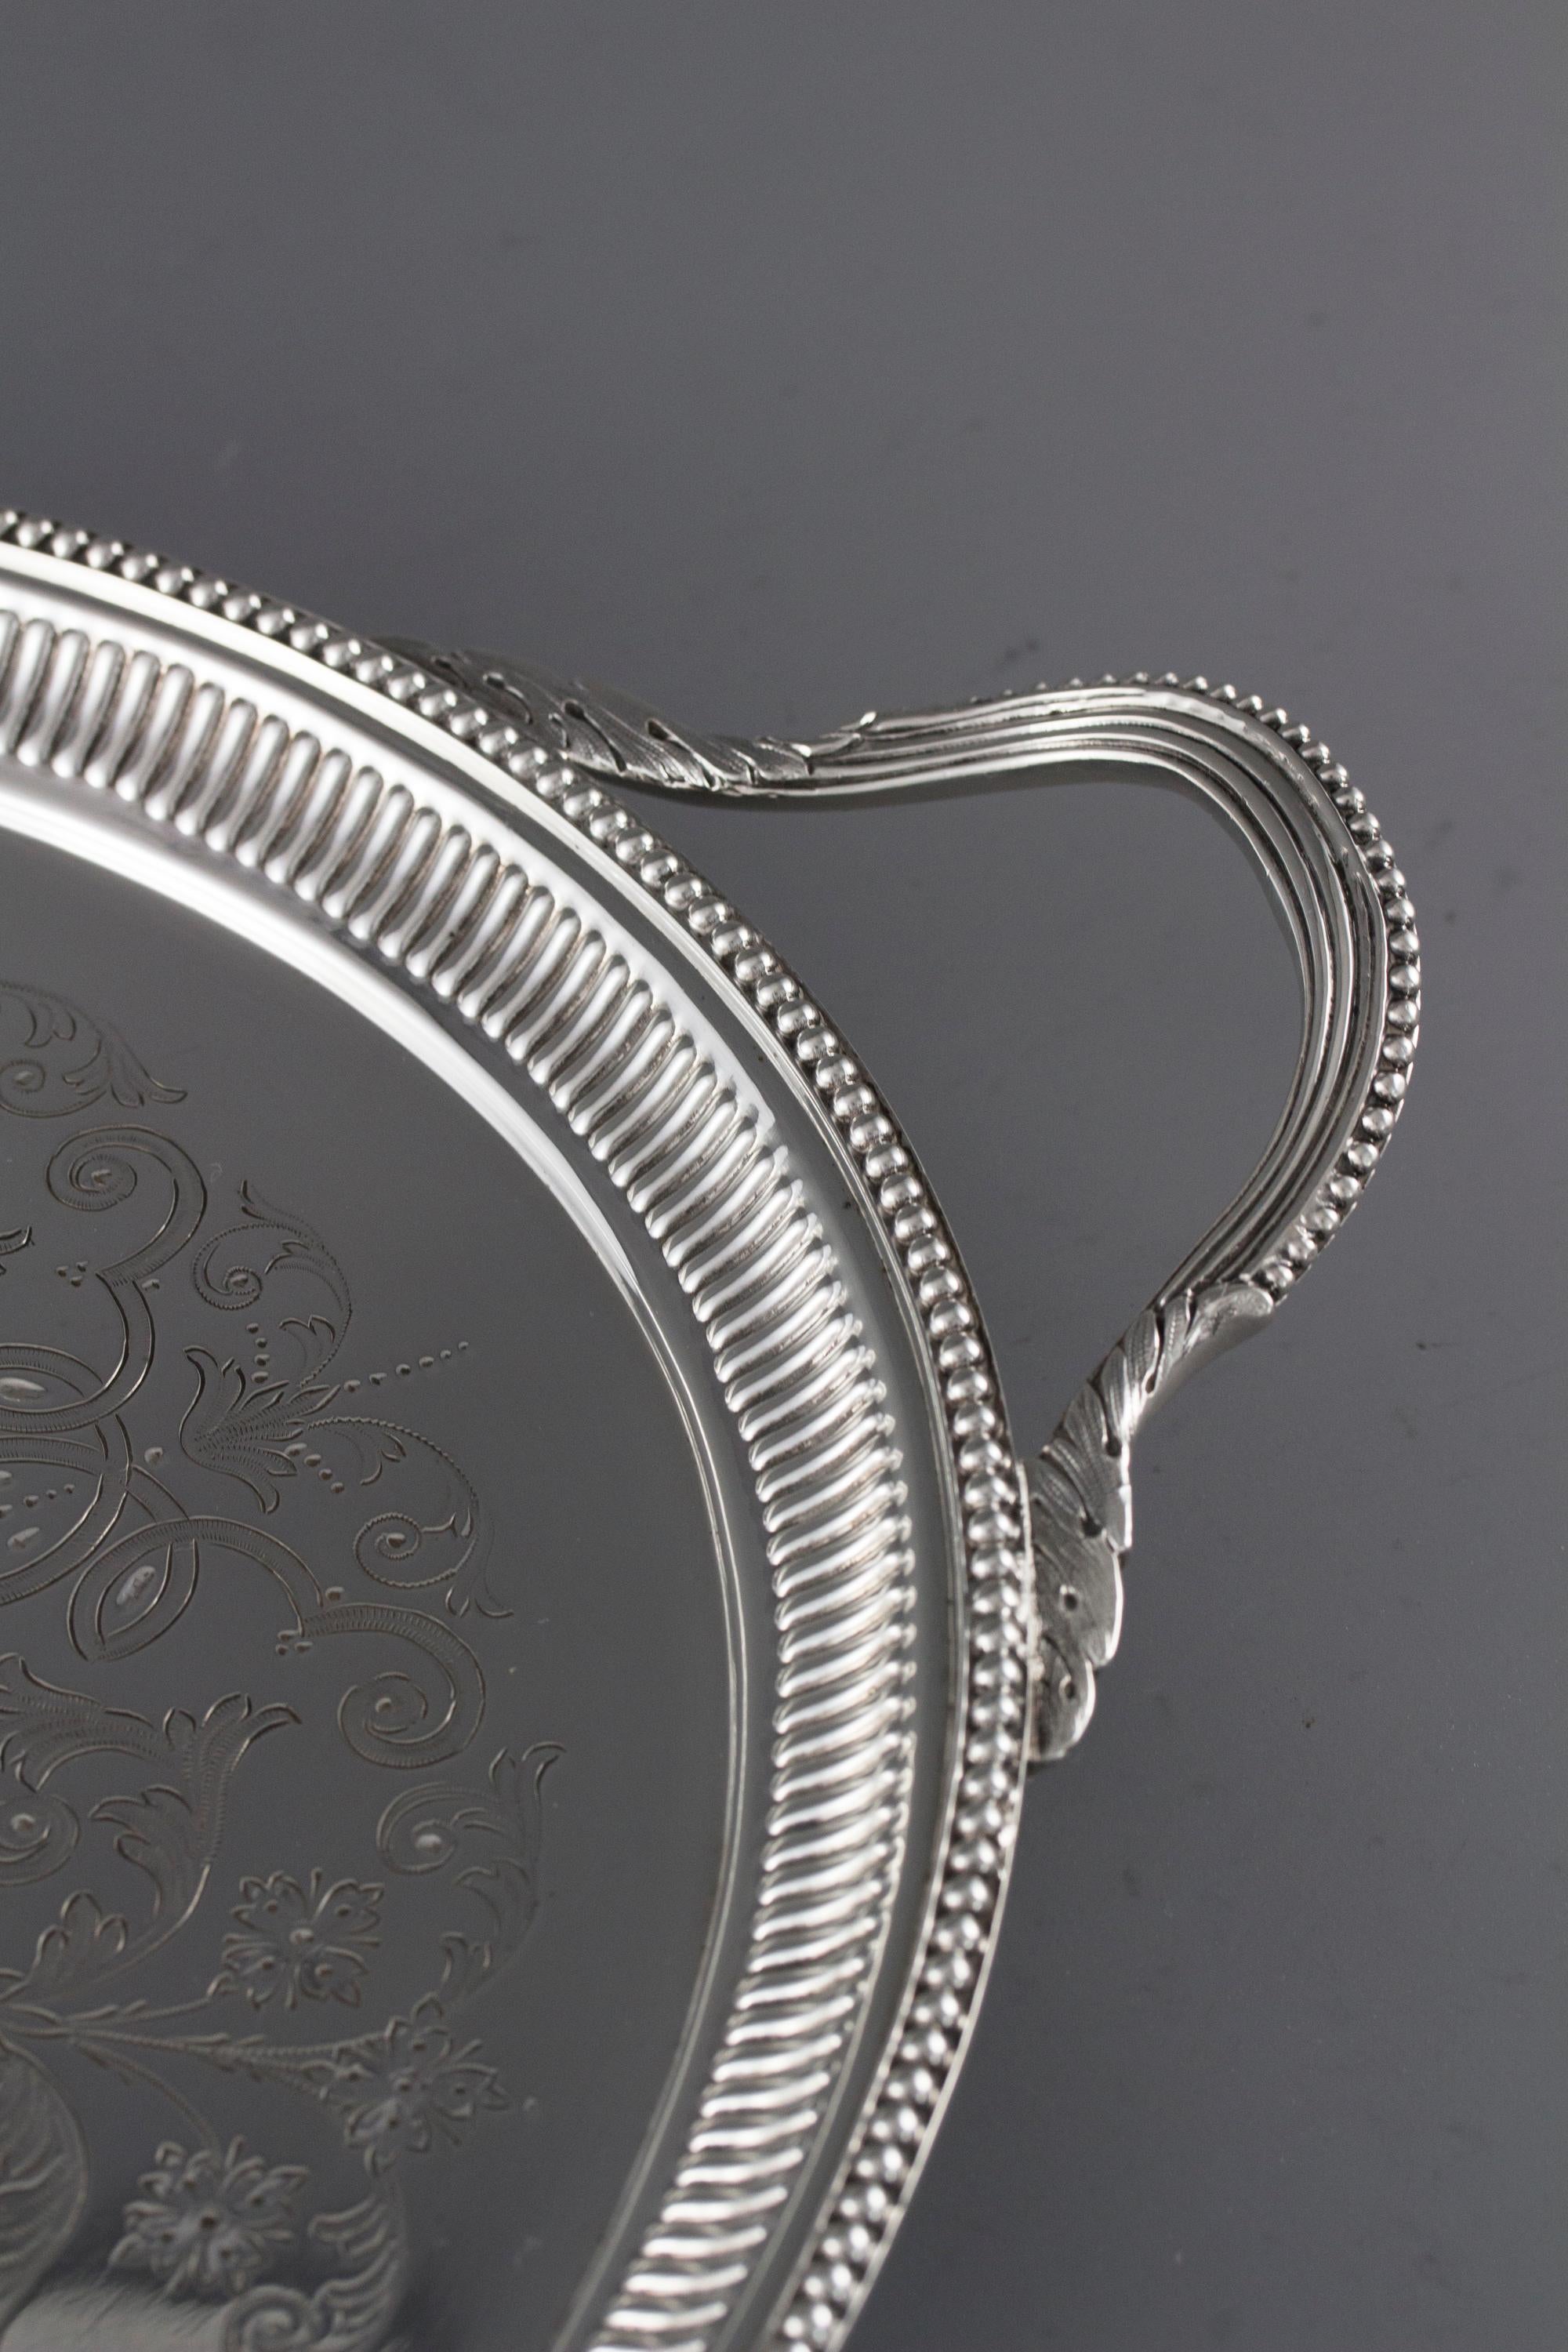 Late 19th Century Late Victorian Silver Tea or Drinks Tray London 1886 by Charles Boyton